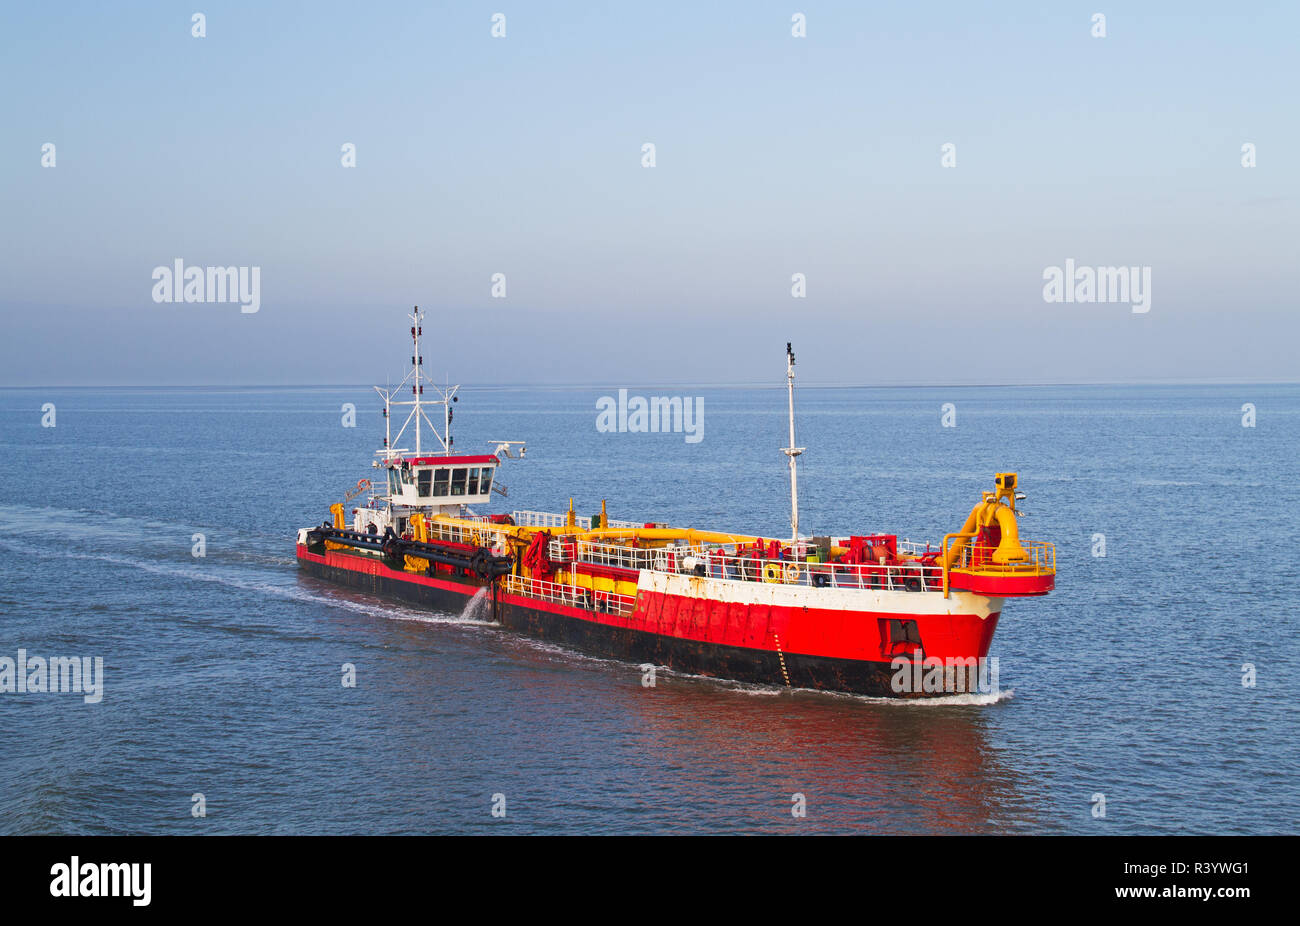 Red dredging vessel working on sea, removing sediment in a waterway Stock Photo